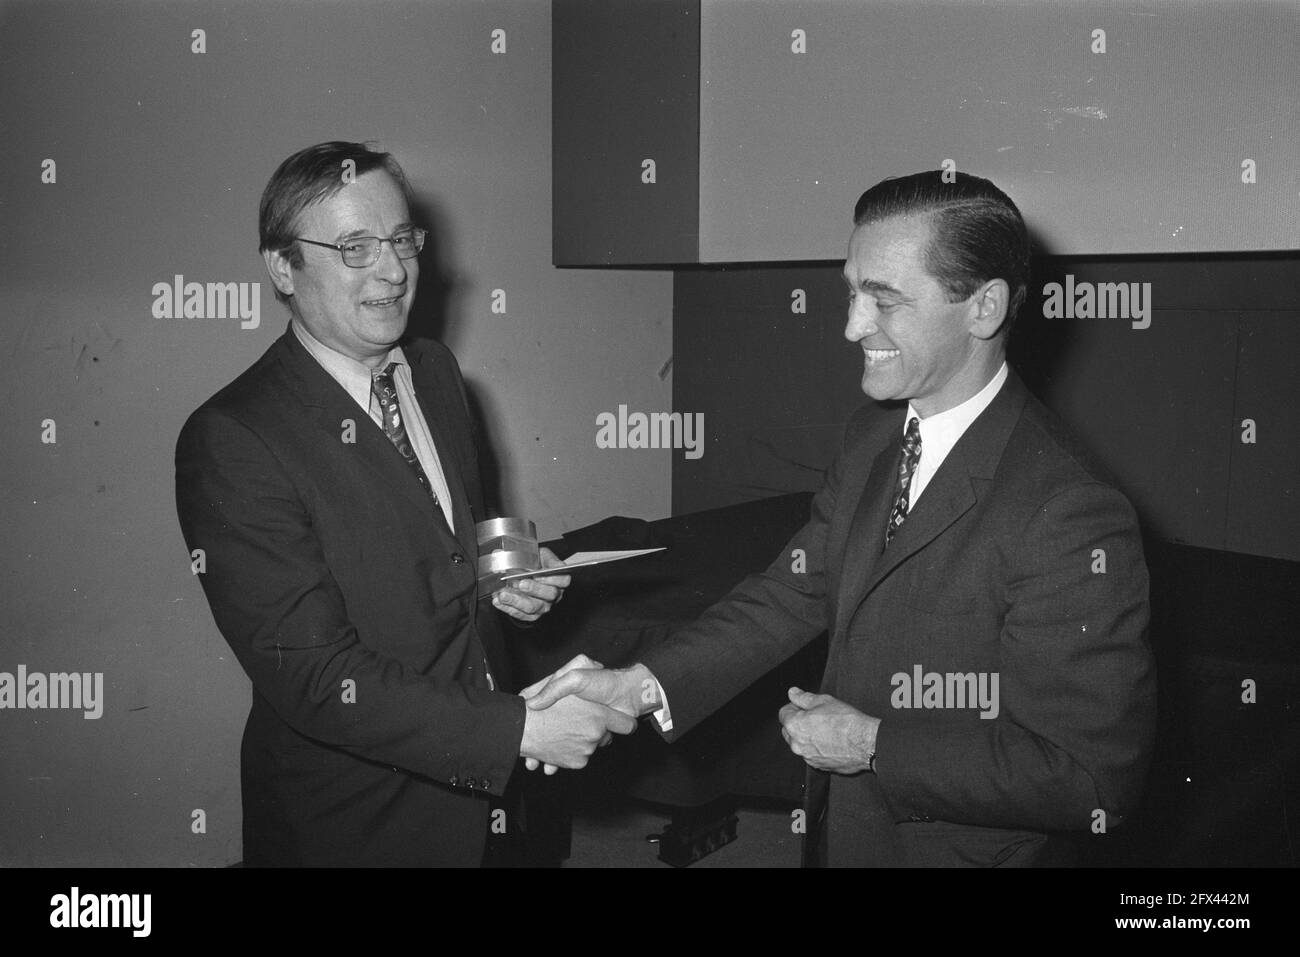 The Minister of Science, jhr. mr. M. L. de Brauw presents the Staatsprijs Beeldende Kunst en Architectuur 1971 to Co Westerik (painter, graphic artist) in, September 24, 1971, graphic artists, museums, awards, painters, The Netherlands, 20th century press agency photo, news to remember, documentary, historic photography 1945-1990, visual stories, human history of the Twentieth Century, capturing moments in time Stock Photo